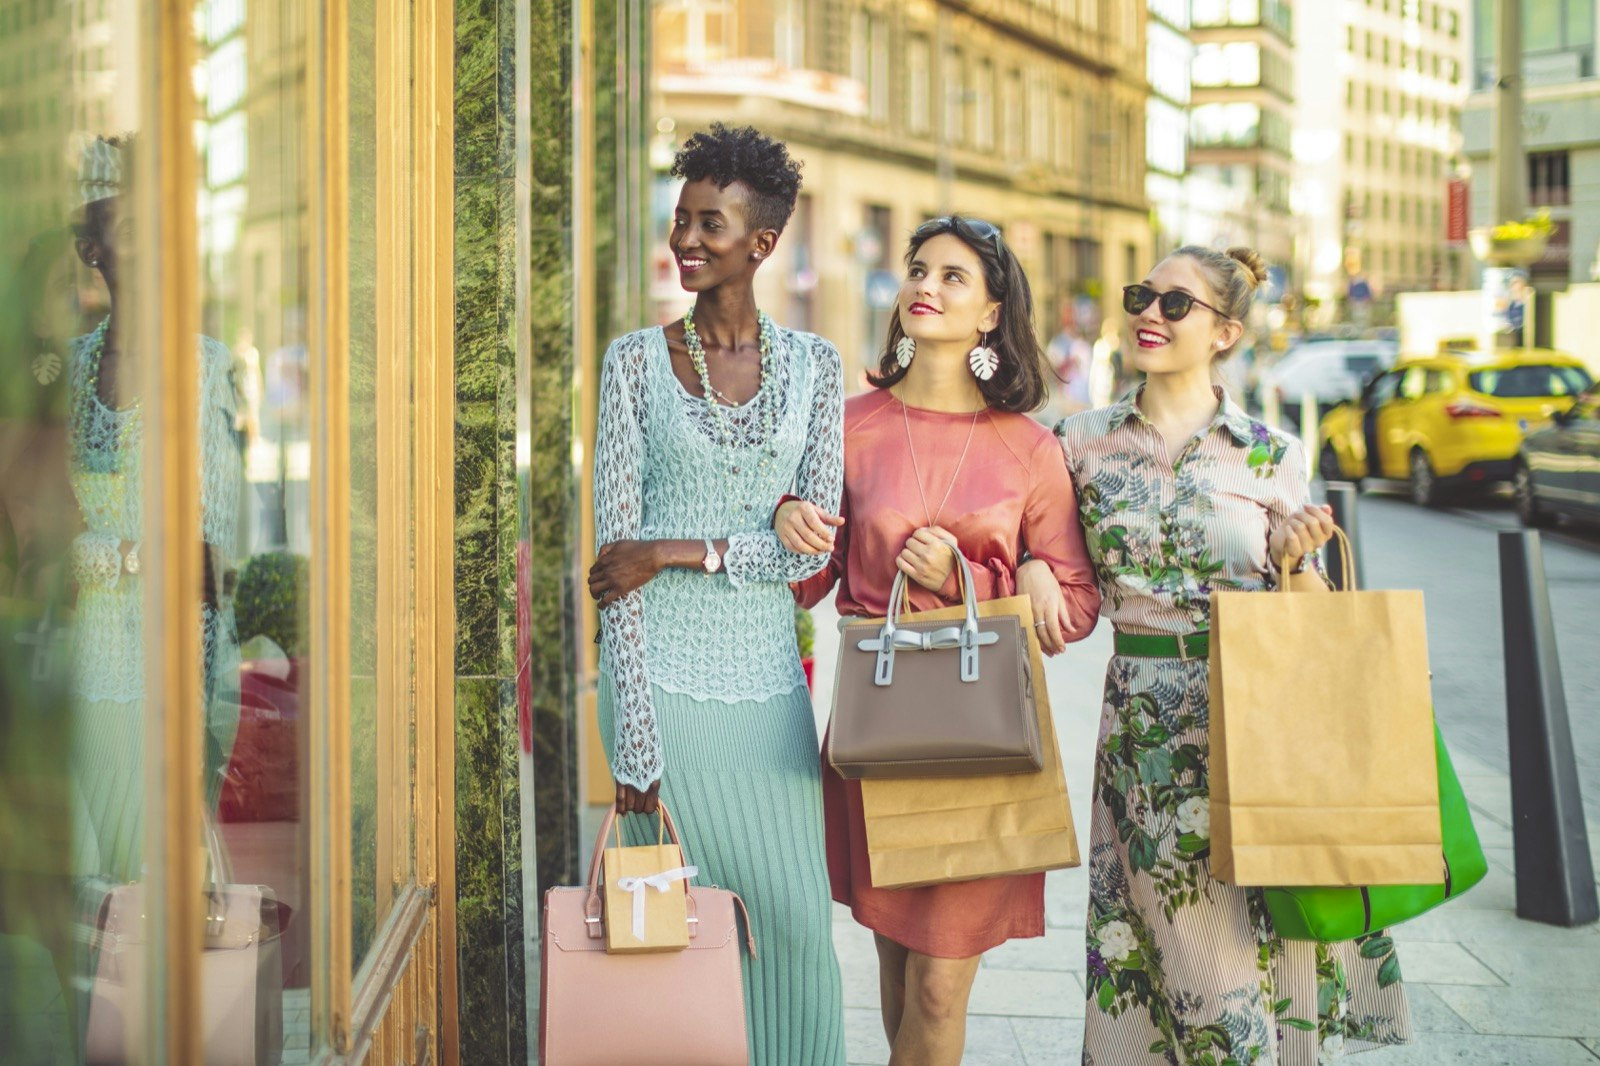 Three well-dressed women walk past a store window holding shopping bags and smiling